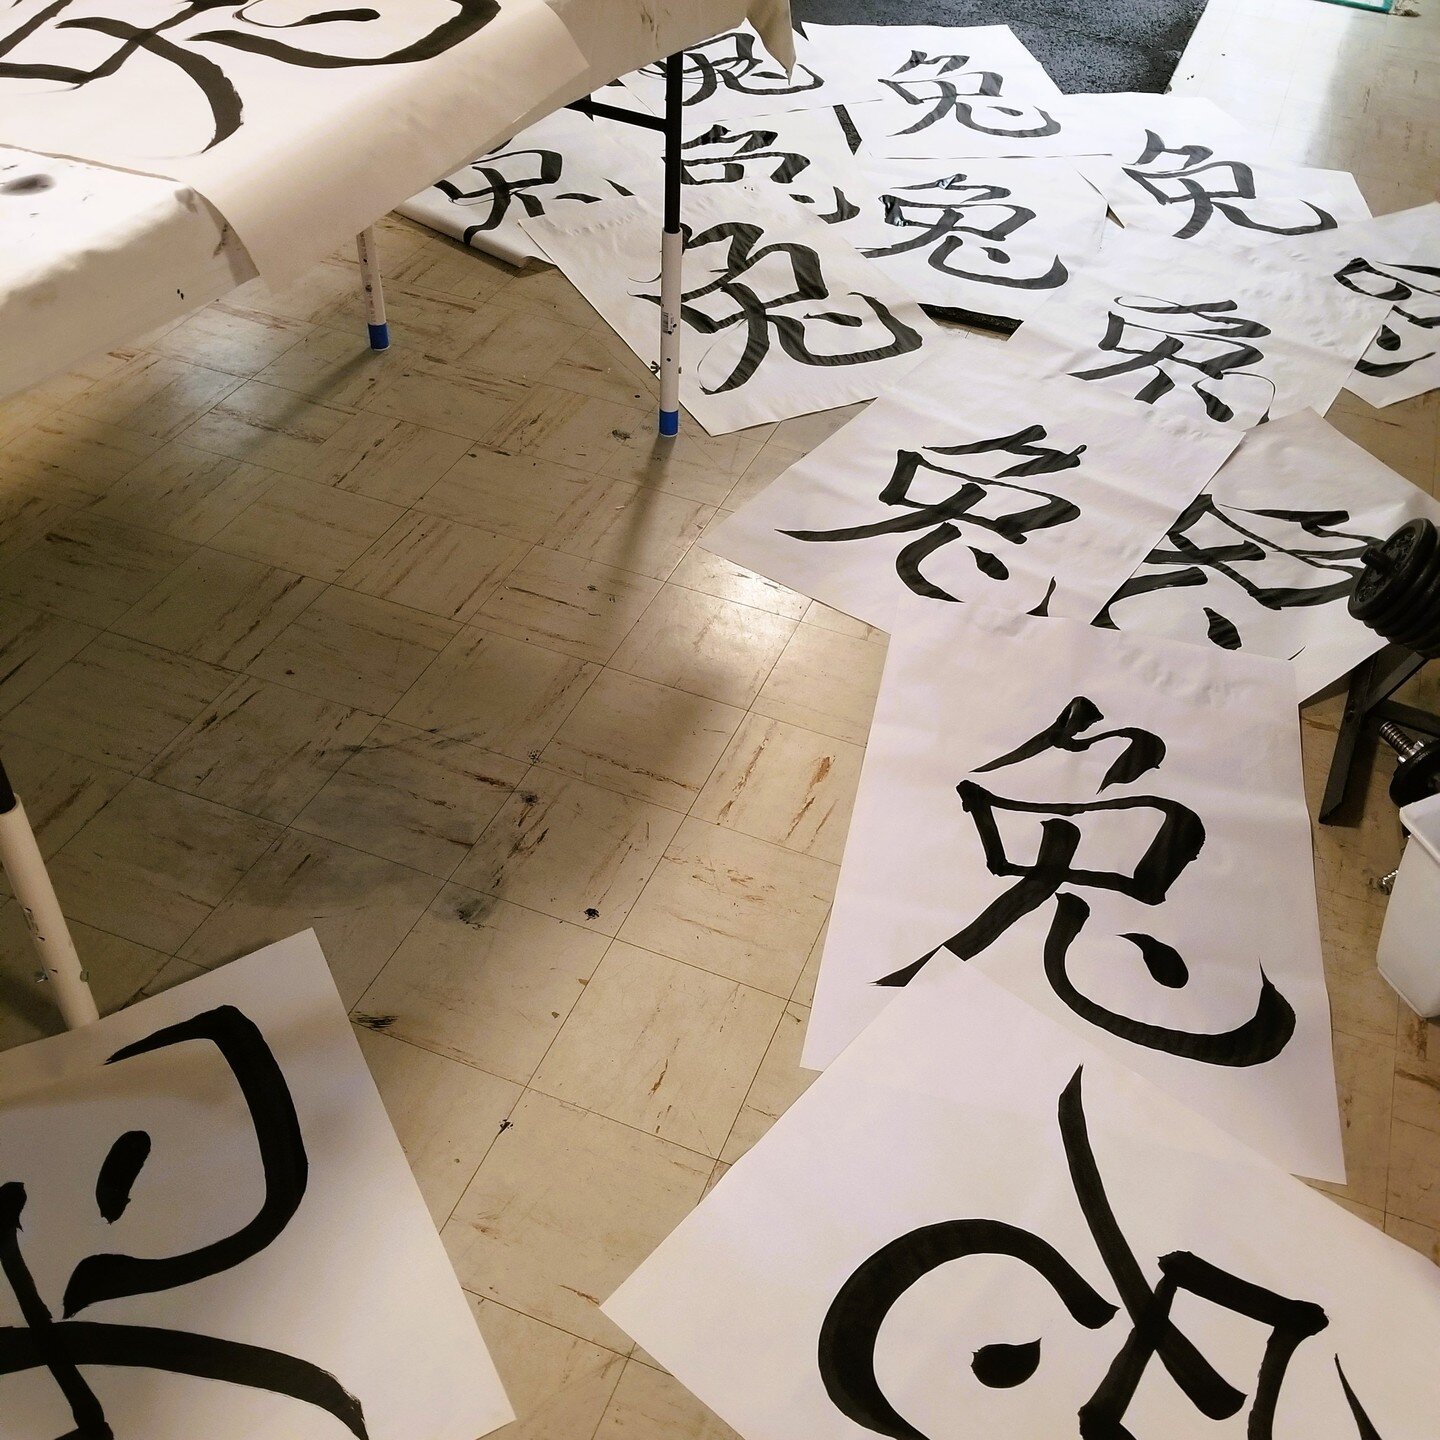 We haven't slung ink in a while - time to get back to our calligraphy practice!! We'll hold our March Shufa workshop on March 19th from 10:00 to 12:00pm. 

If the weather is nice, we'll set up on the pavilion. If it's cool, we'll set up downstairs. P